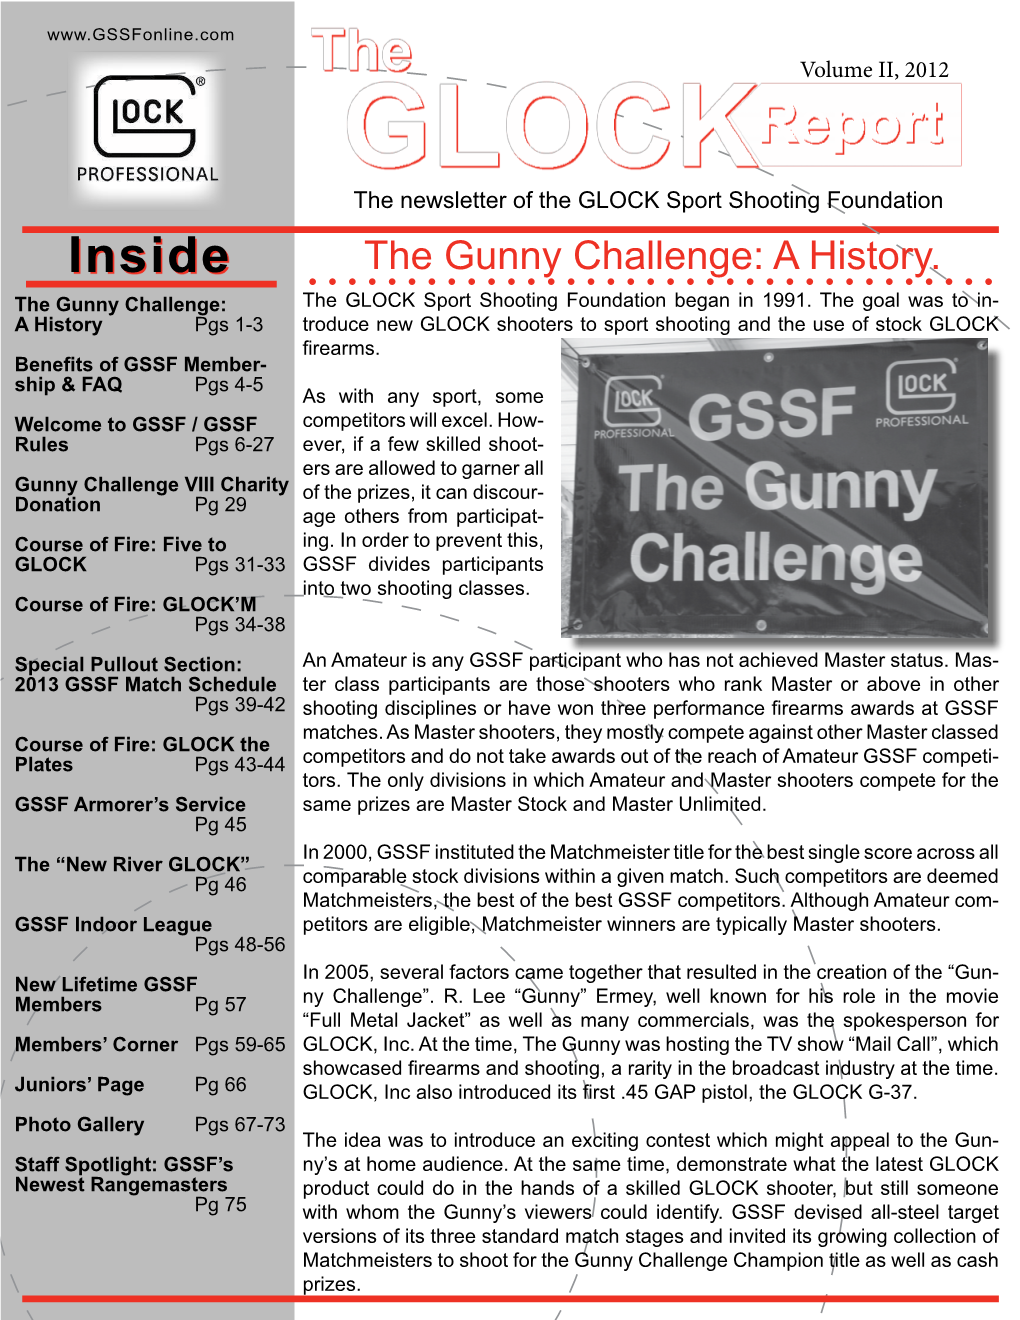 GLOCK Sport Shooting Foundation Inside the Gunny Challenge: a History